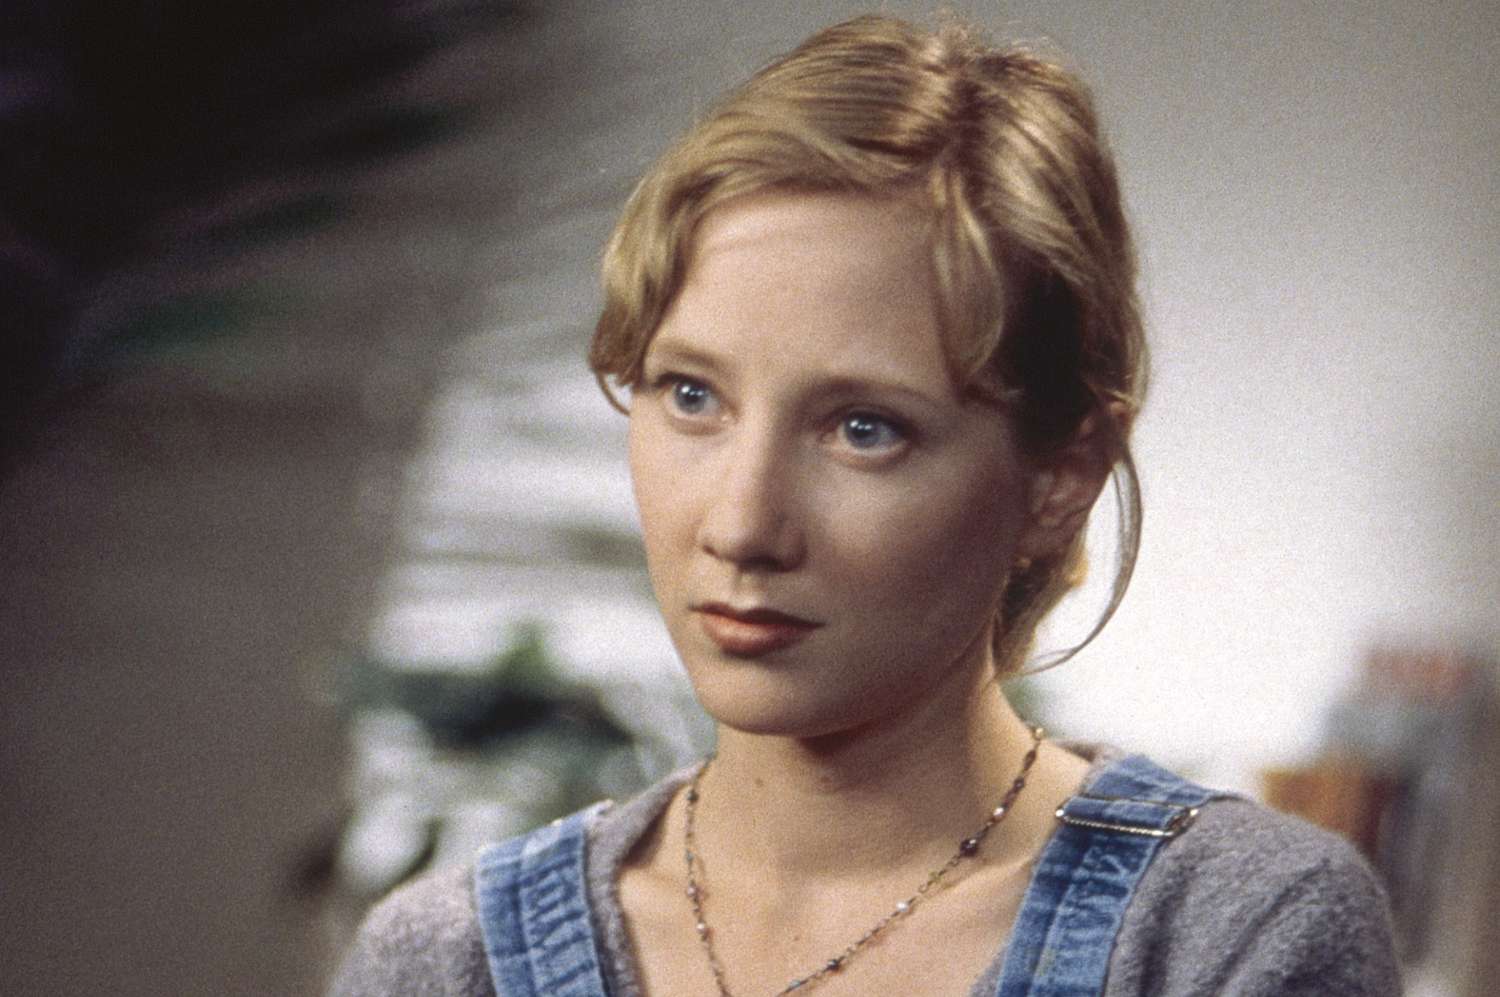 Anne Heche memorable roles